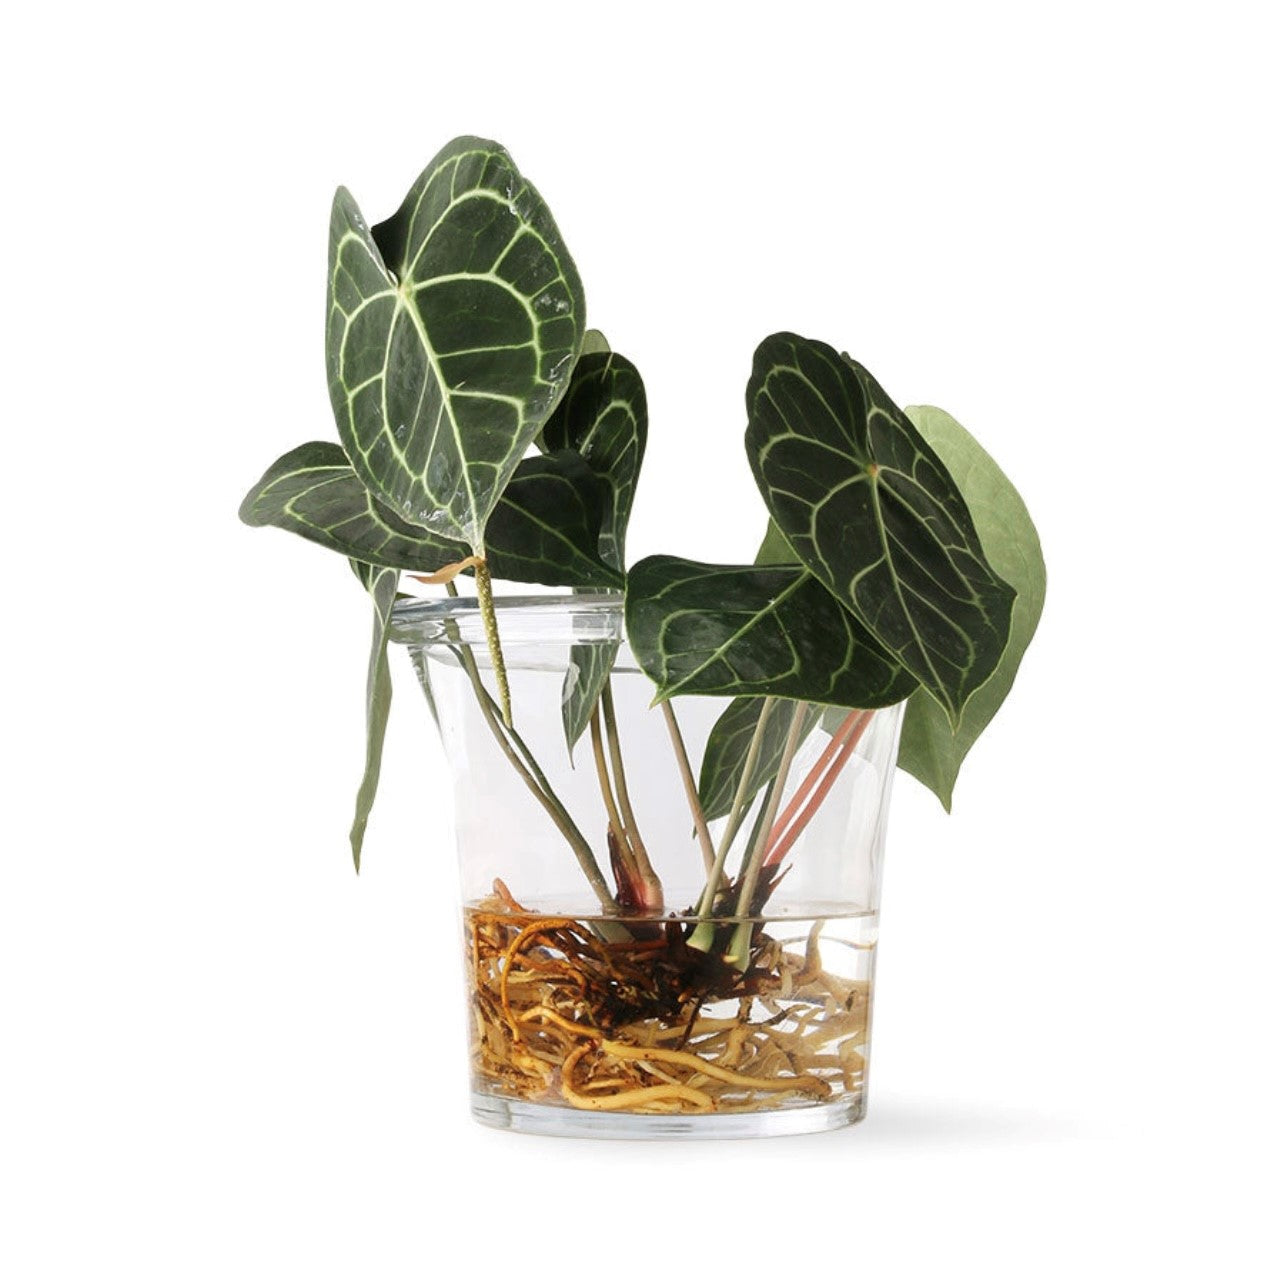 solid glass transparent planter with plant showing roots